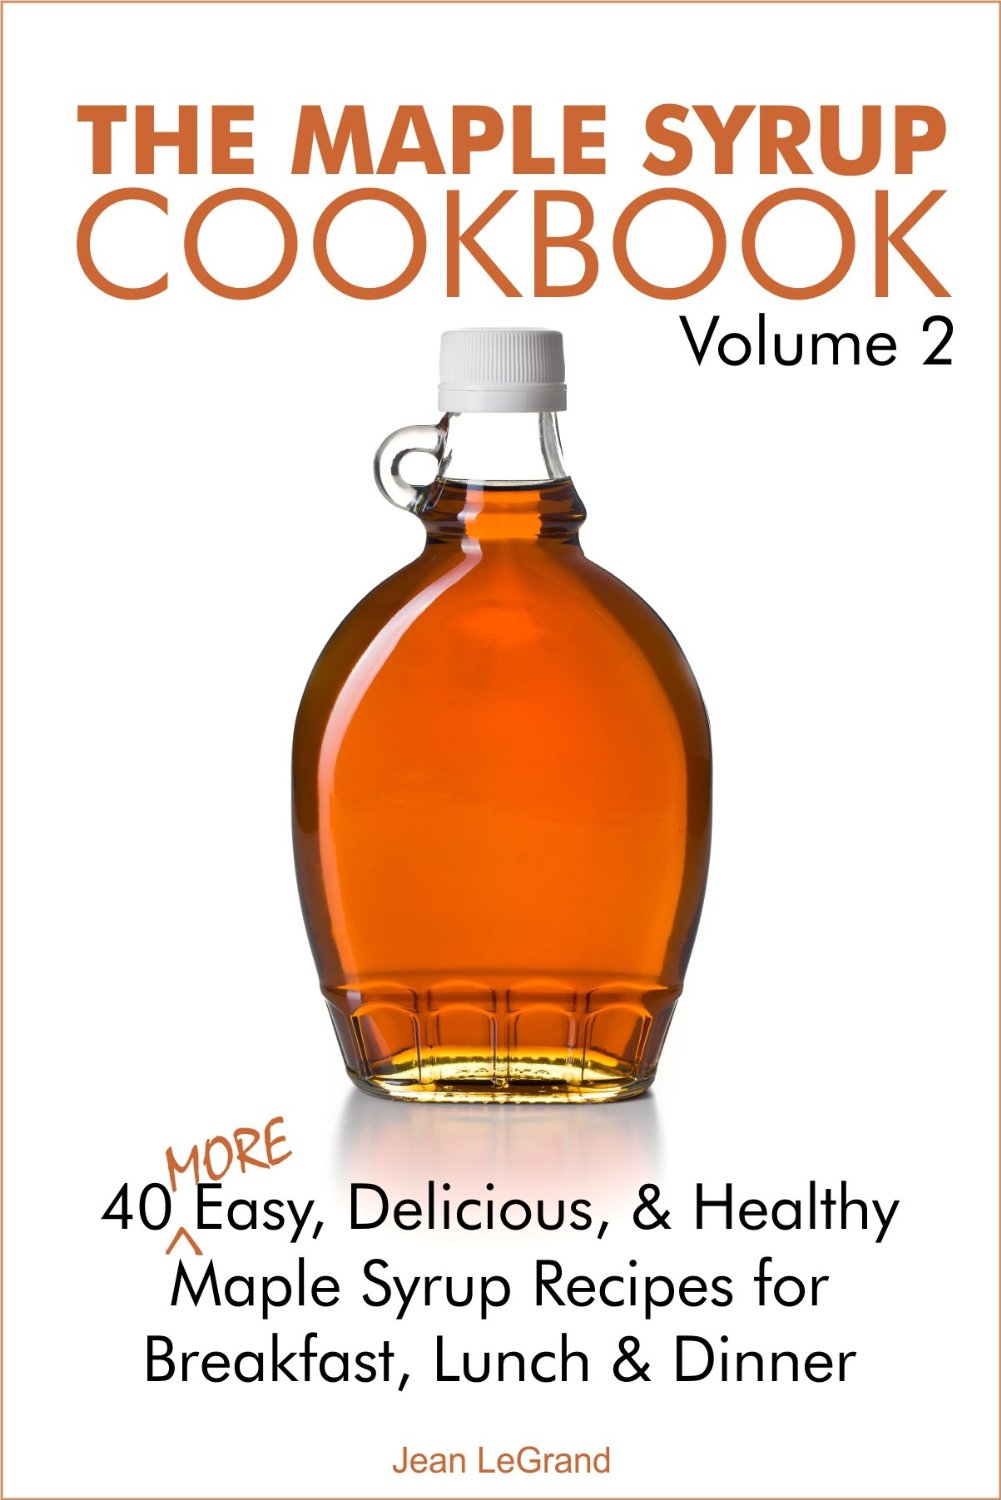 The Maple Syrup Cookbook 2: 40 More Easy, Delicious & Healthy Maple Syrup Recipes for Breakfast Lunch & Dinner by Jean LeGrand